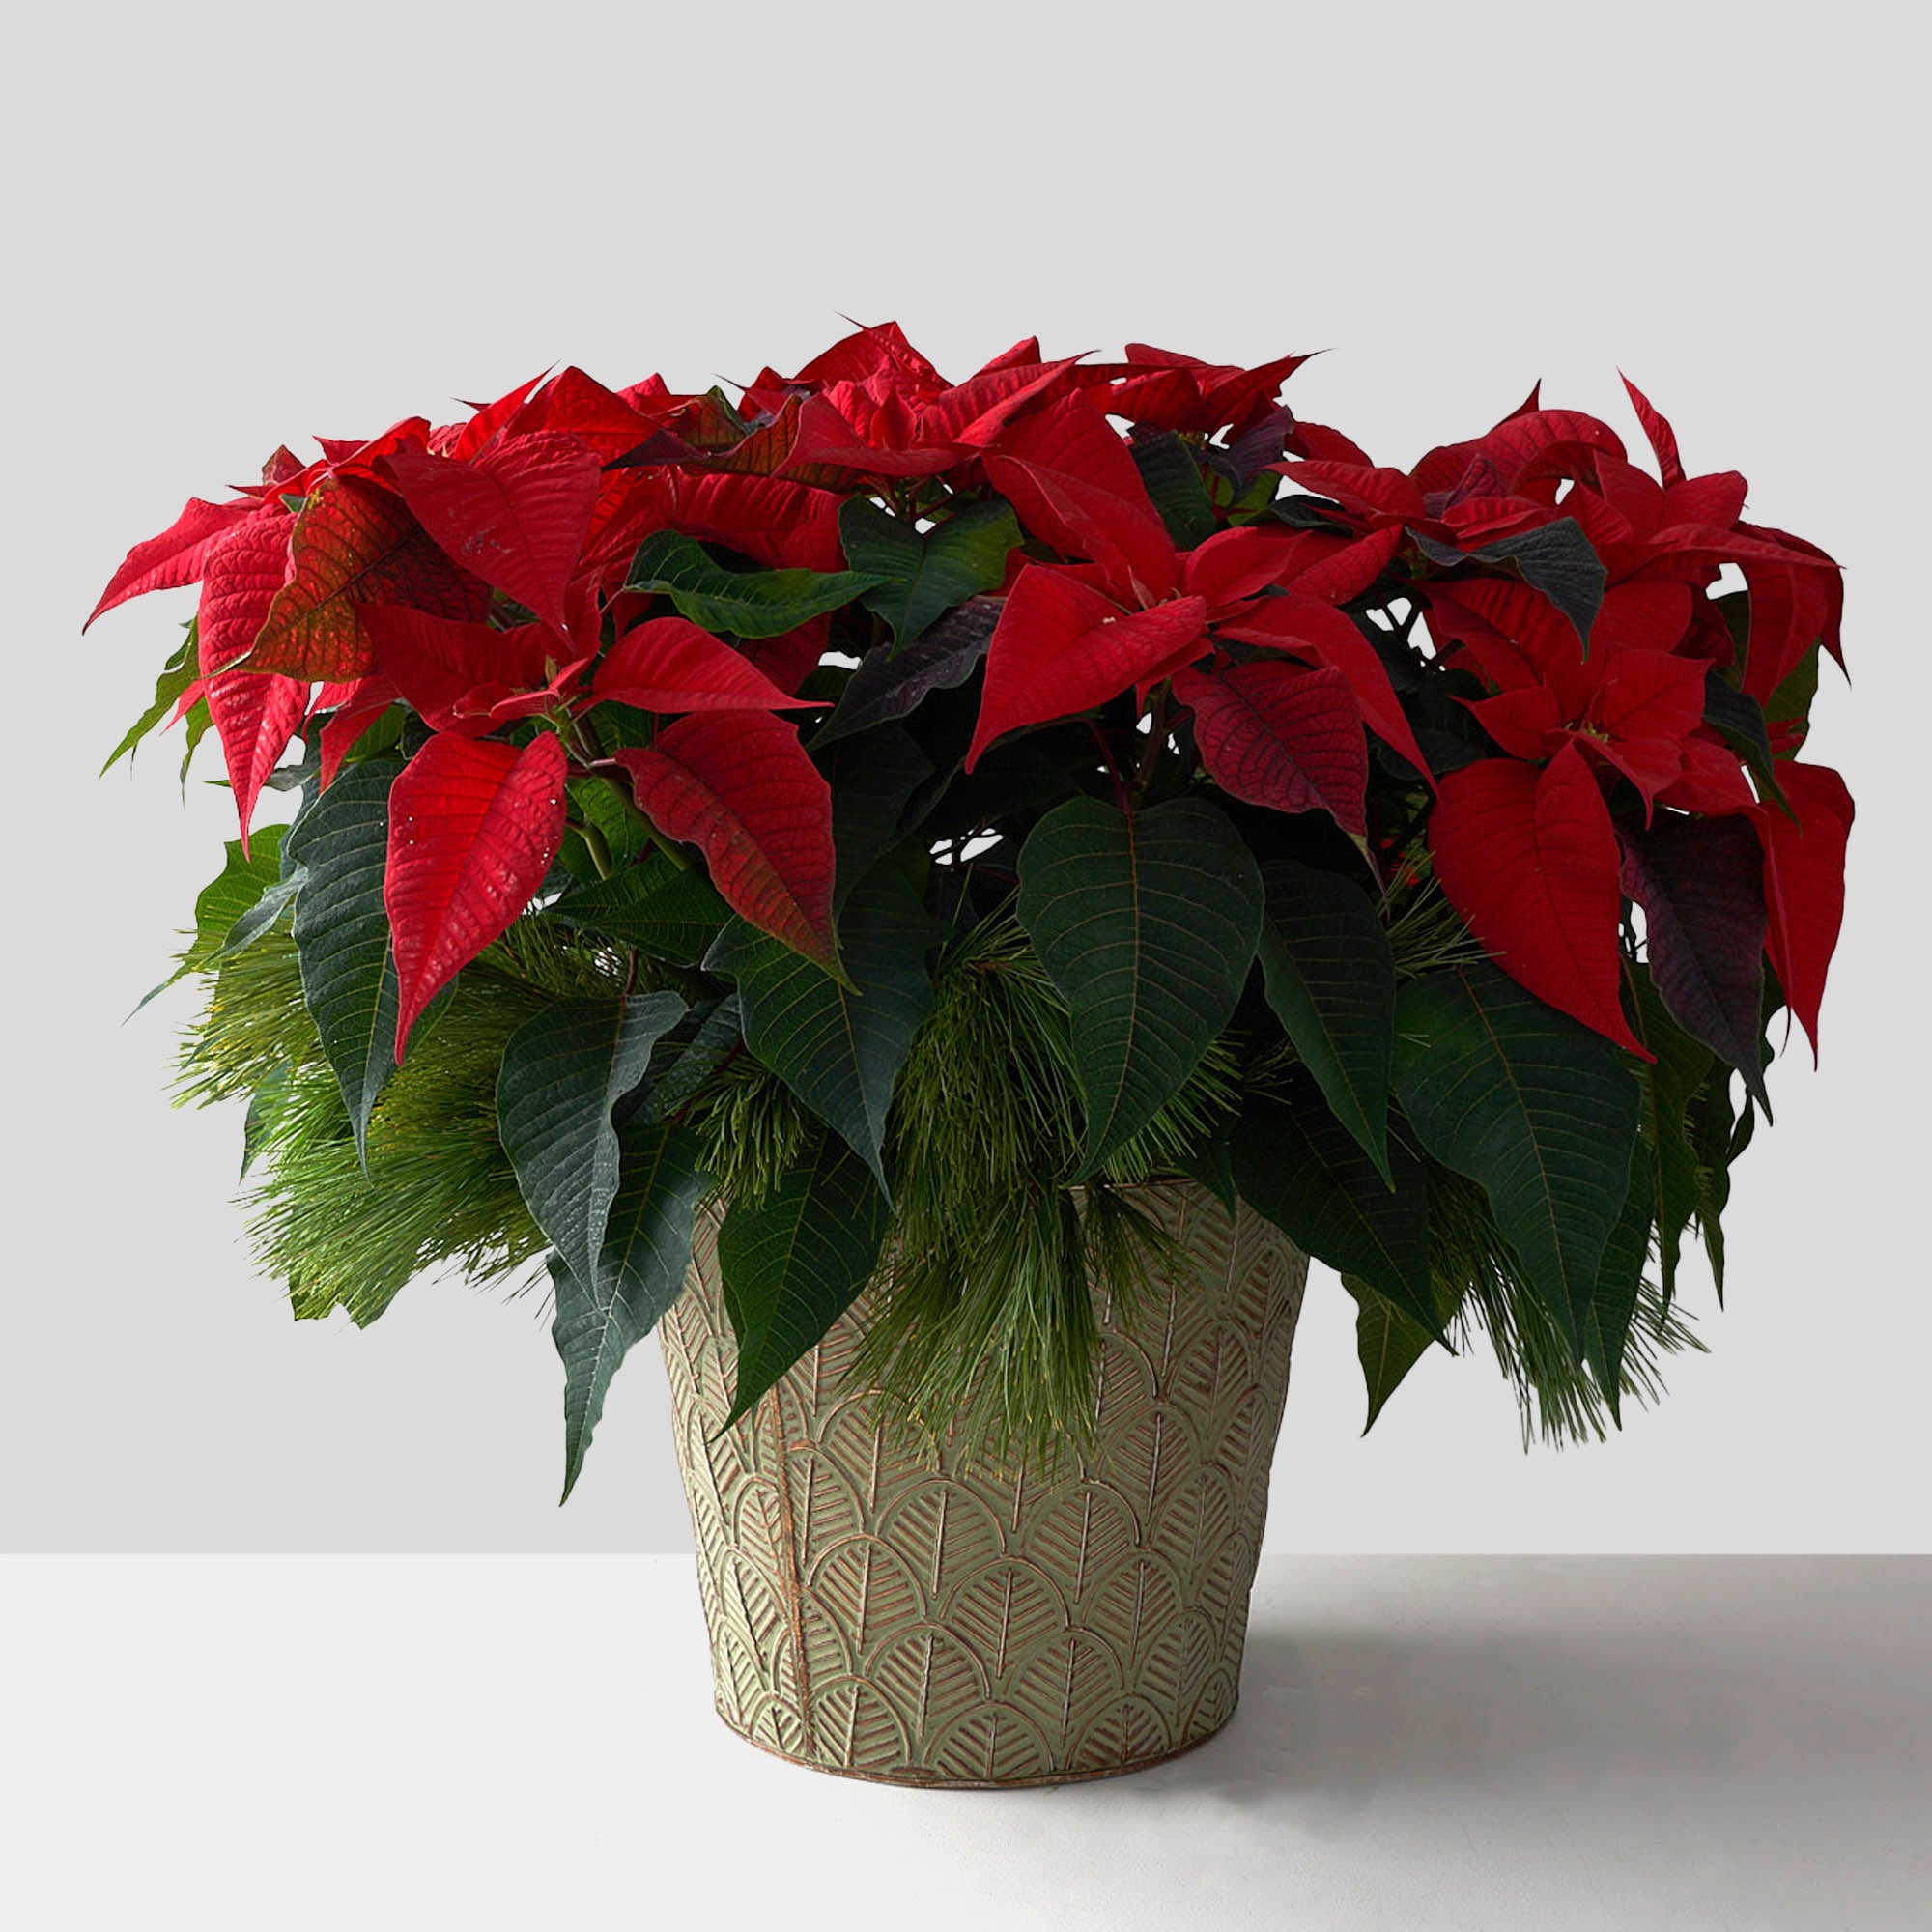 Red poinsettia plant in patterned tin pot with pine boughs.